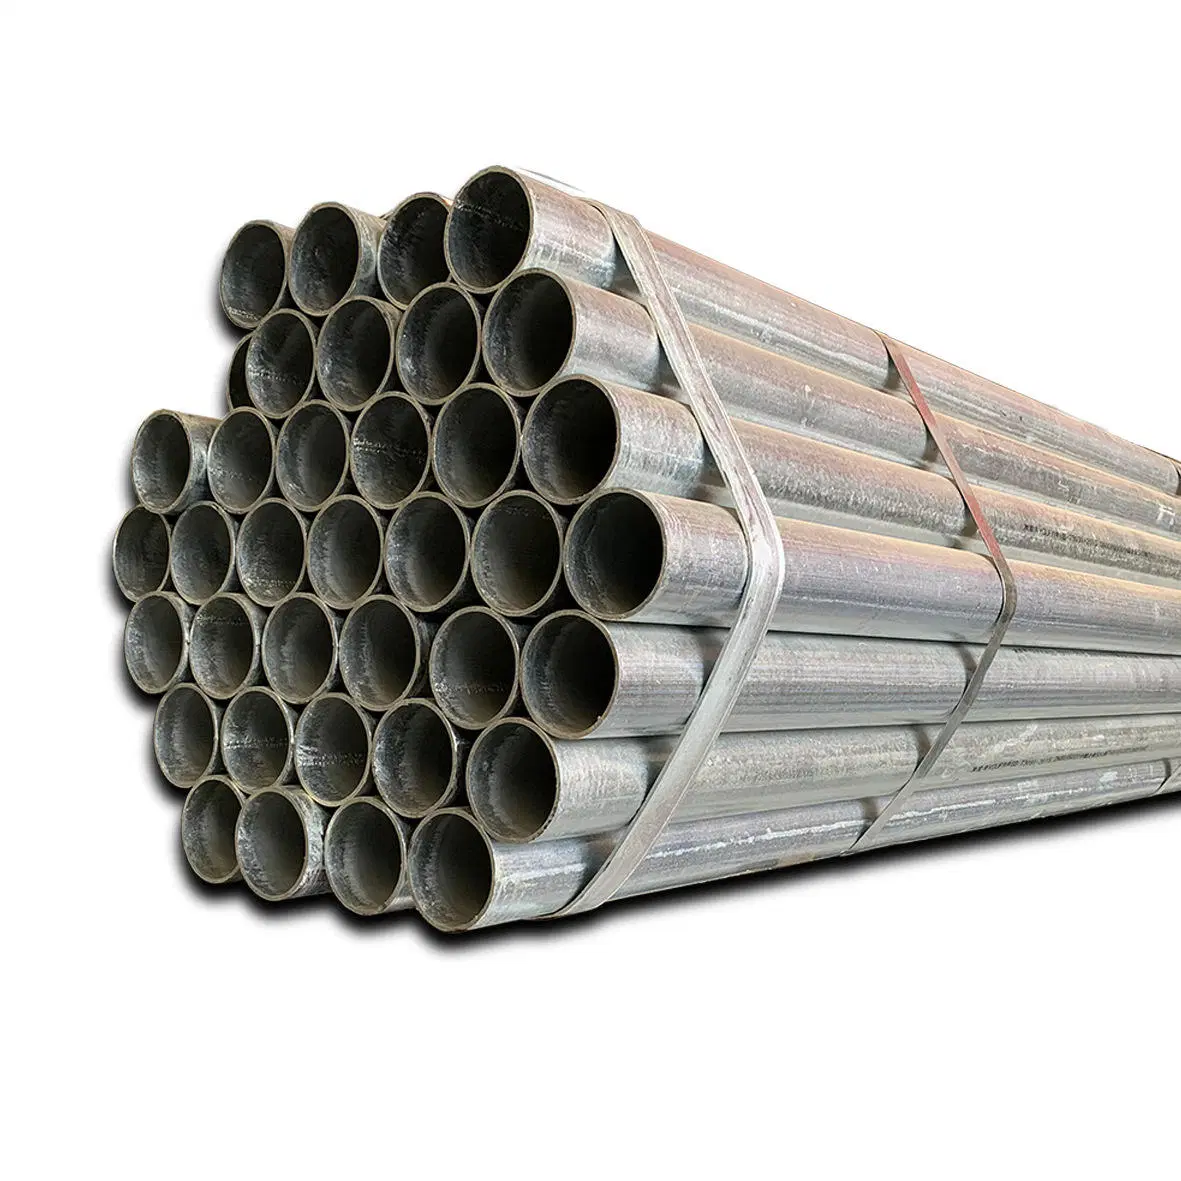 15mm Diameter 3/4-in Black Powder Coated ASTM A120 Galvanized Steel Structural Pipe Thickness 2.5mm